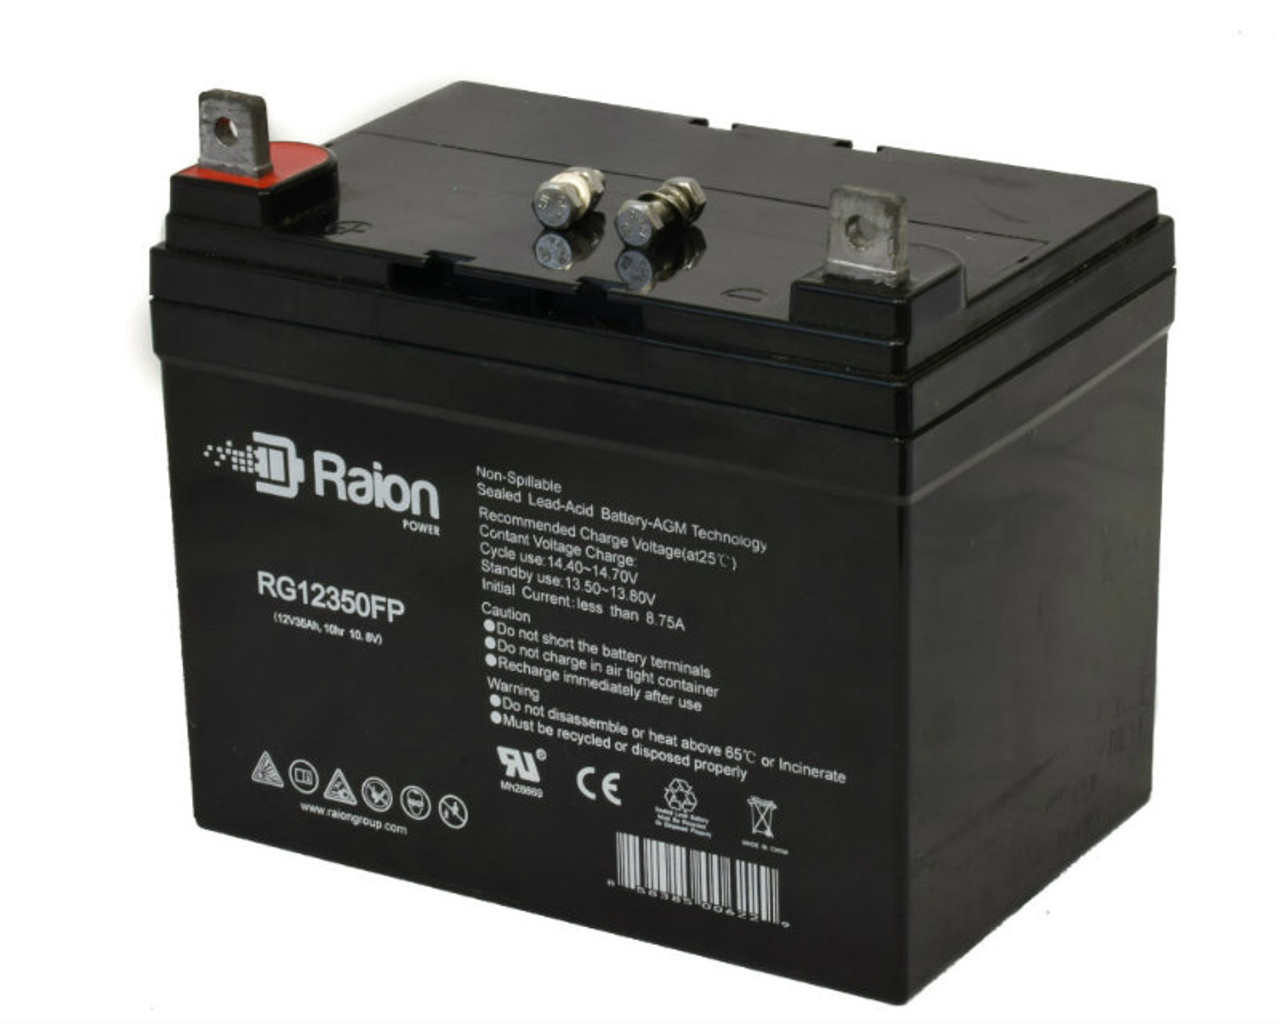 Raion Power Replacement 12V 35Ah RG12350FP Mobility Scooter Battery for Merits Health Products Pioneer S135